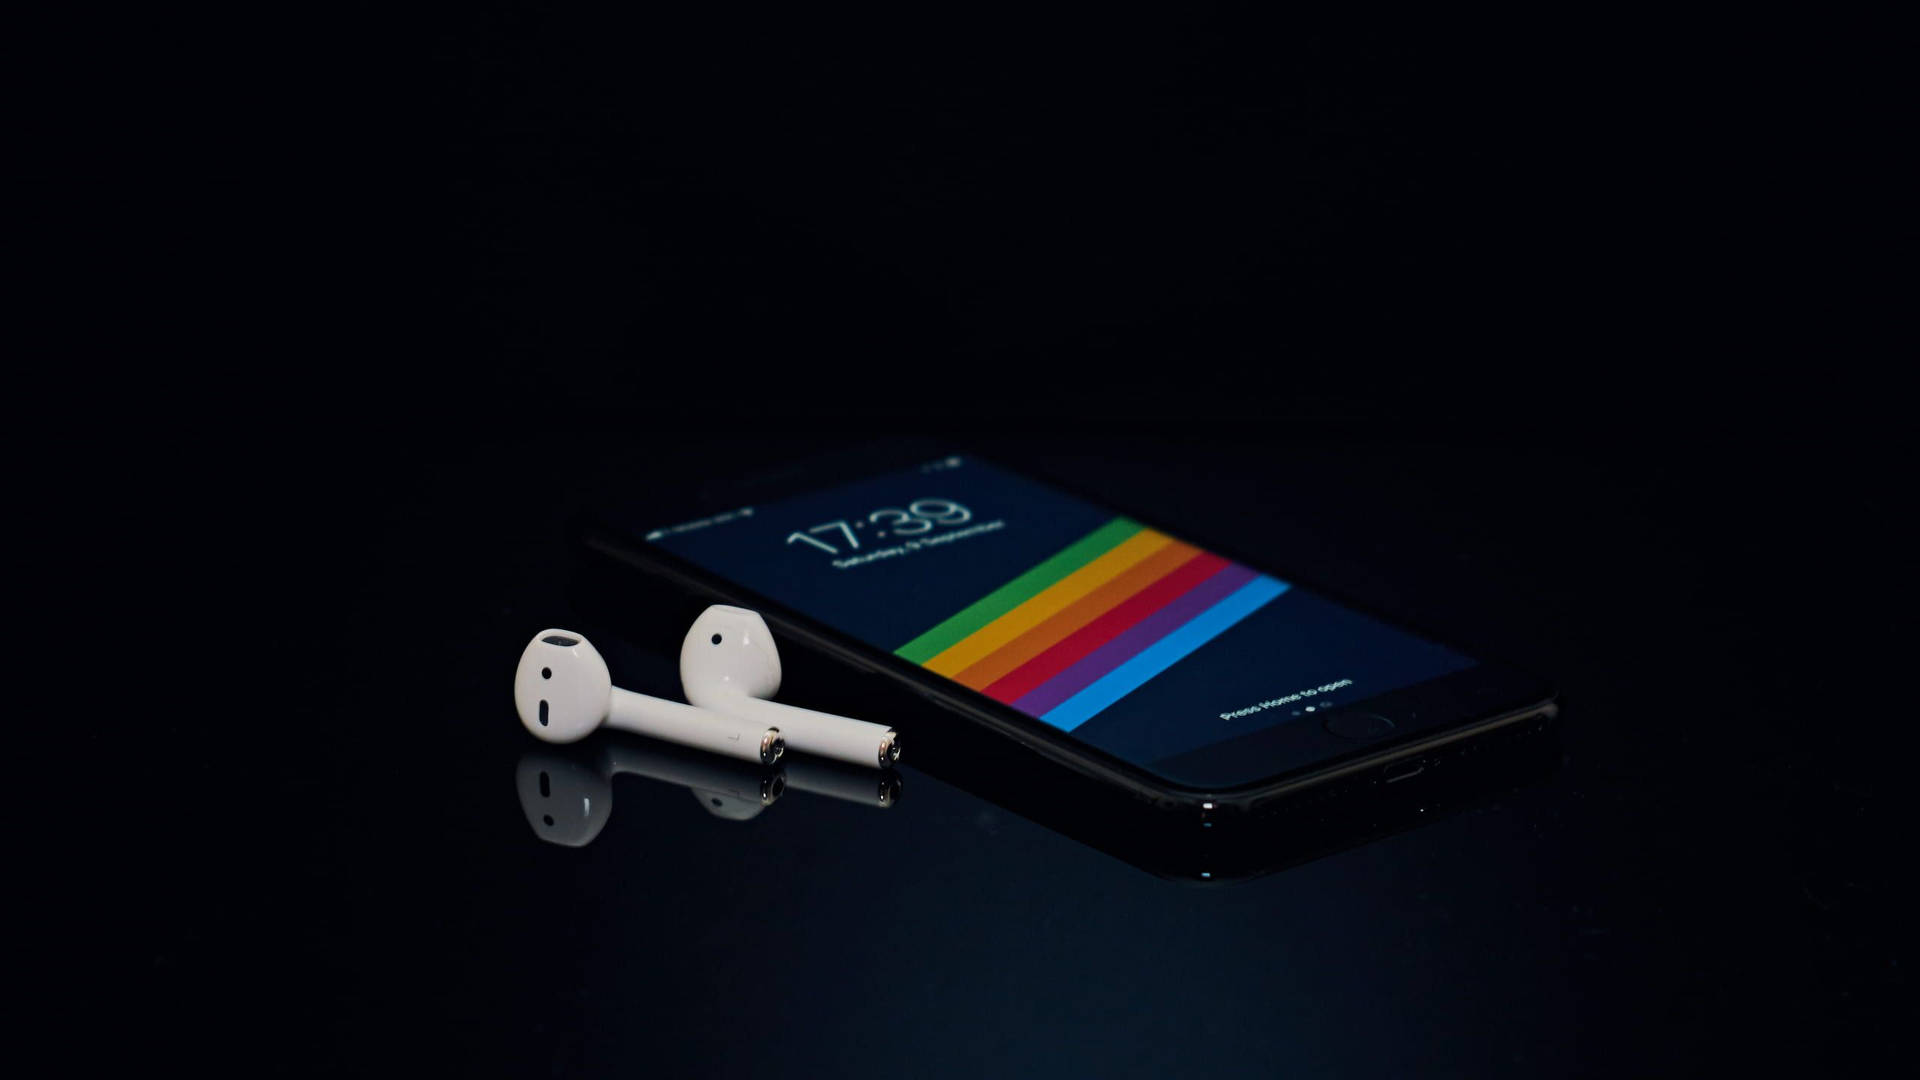 Airpods With Black Iphone 7 Background